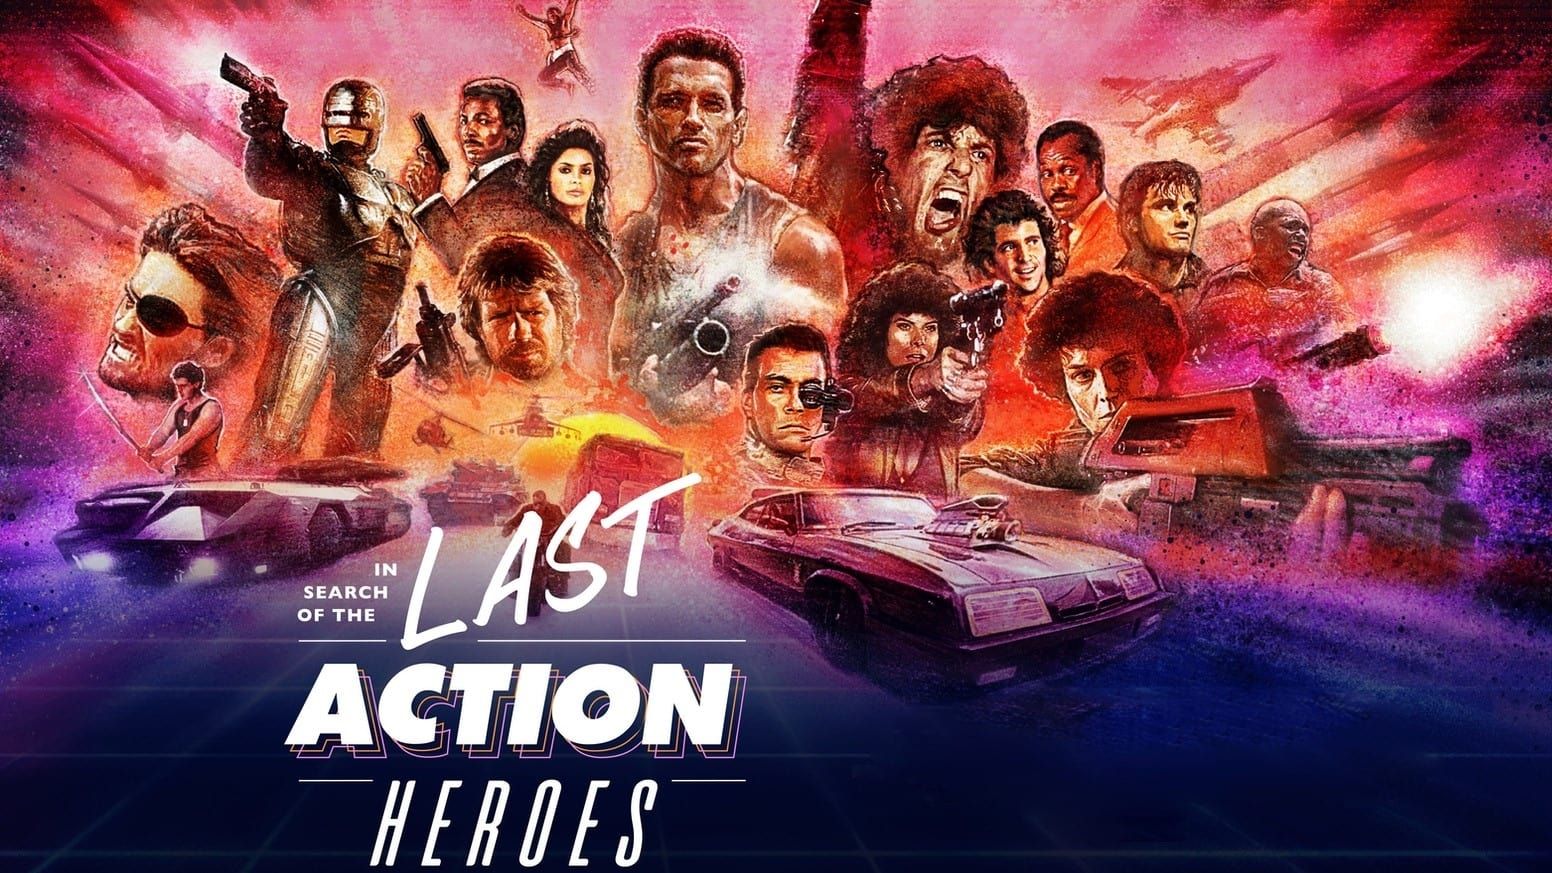 Cubierta de In Search of the Last Action Heroes